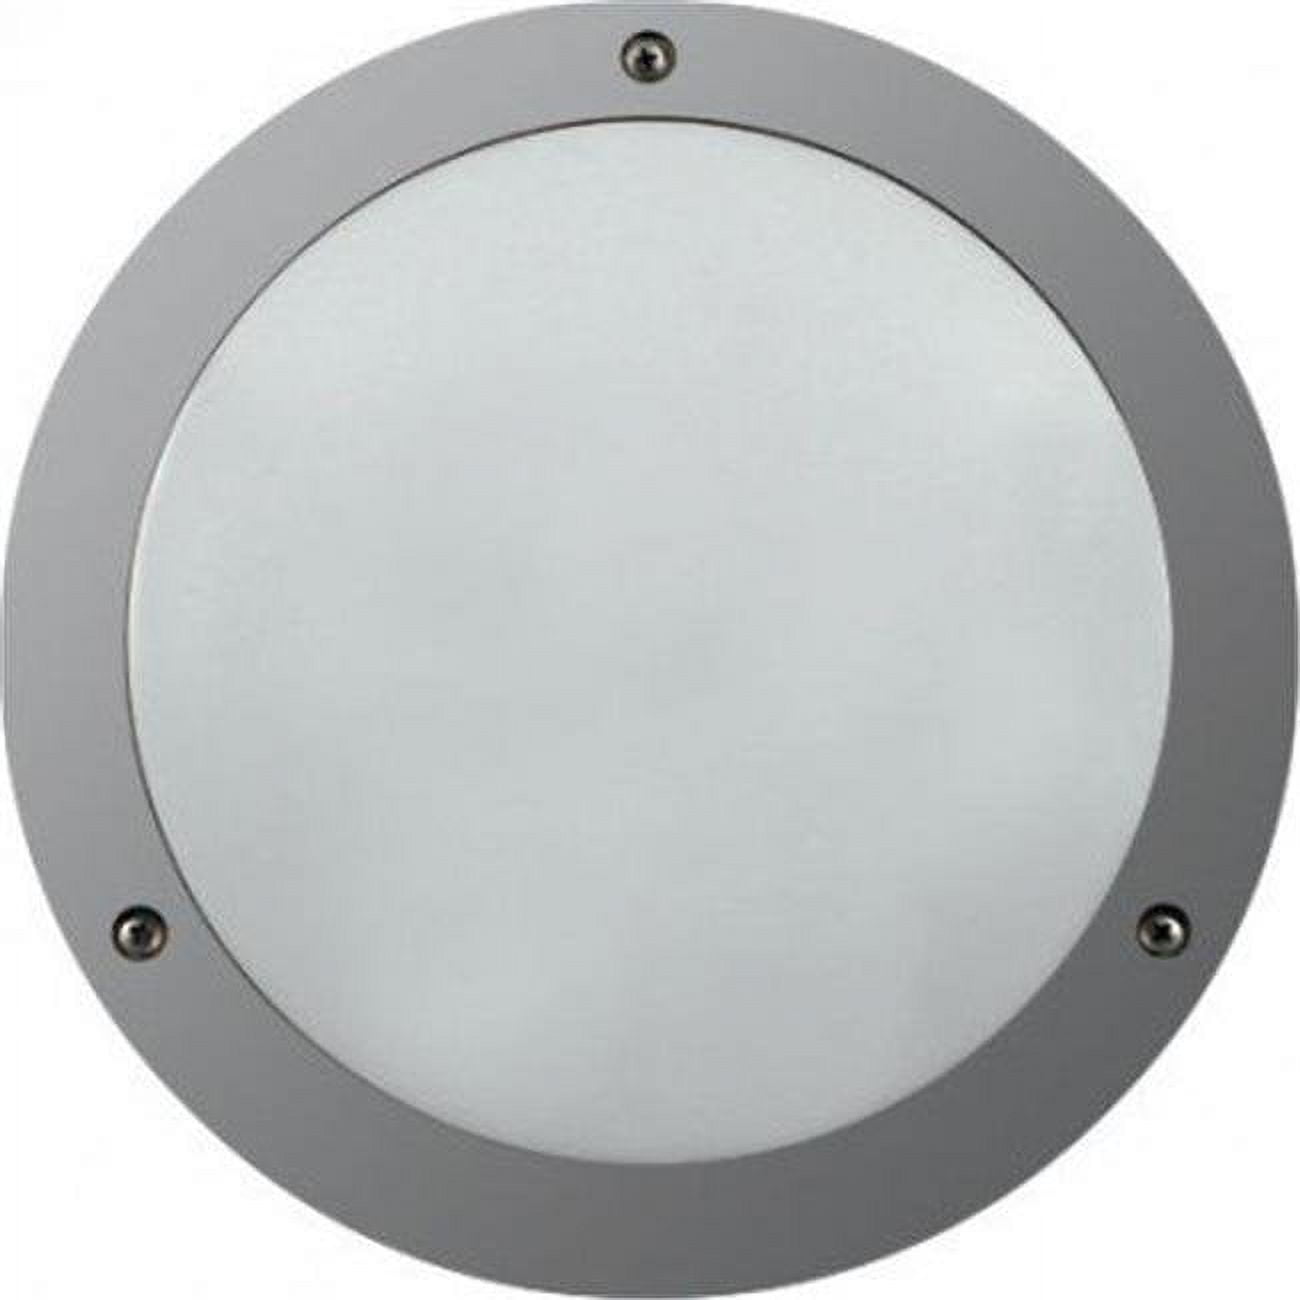 Picture of Dabmar Lighting W3986-GRY 26 watt Surface Mount Wall Fixture - 120V